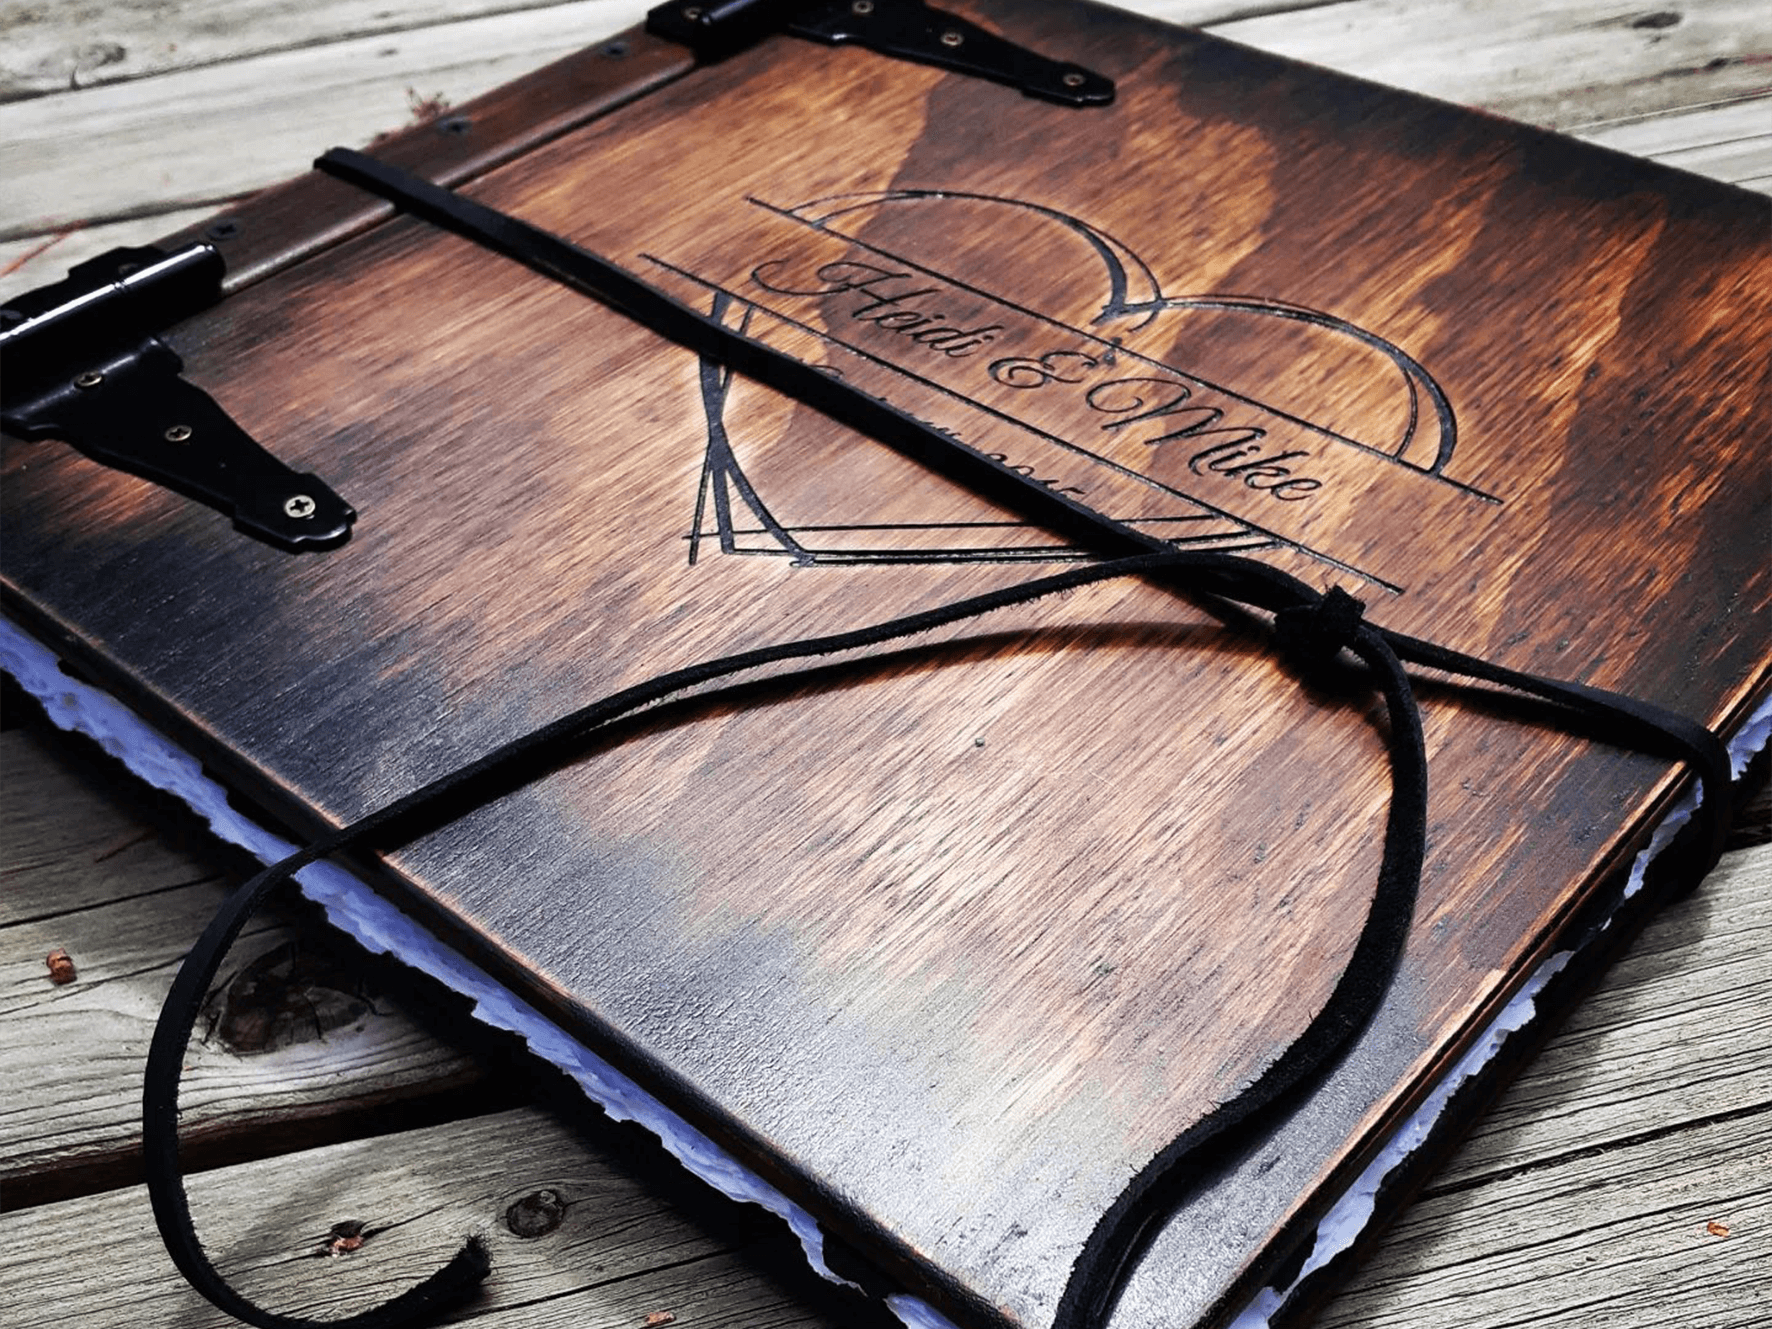 Engraved Wood Scrapbook" | Celebrate 5 years of love and memories with an engraved wood scrapbook by Rustic Engravings. A beautiful and thoughtful way to capture the moments that matter. - The perfect gift for your special someone.